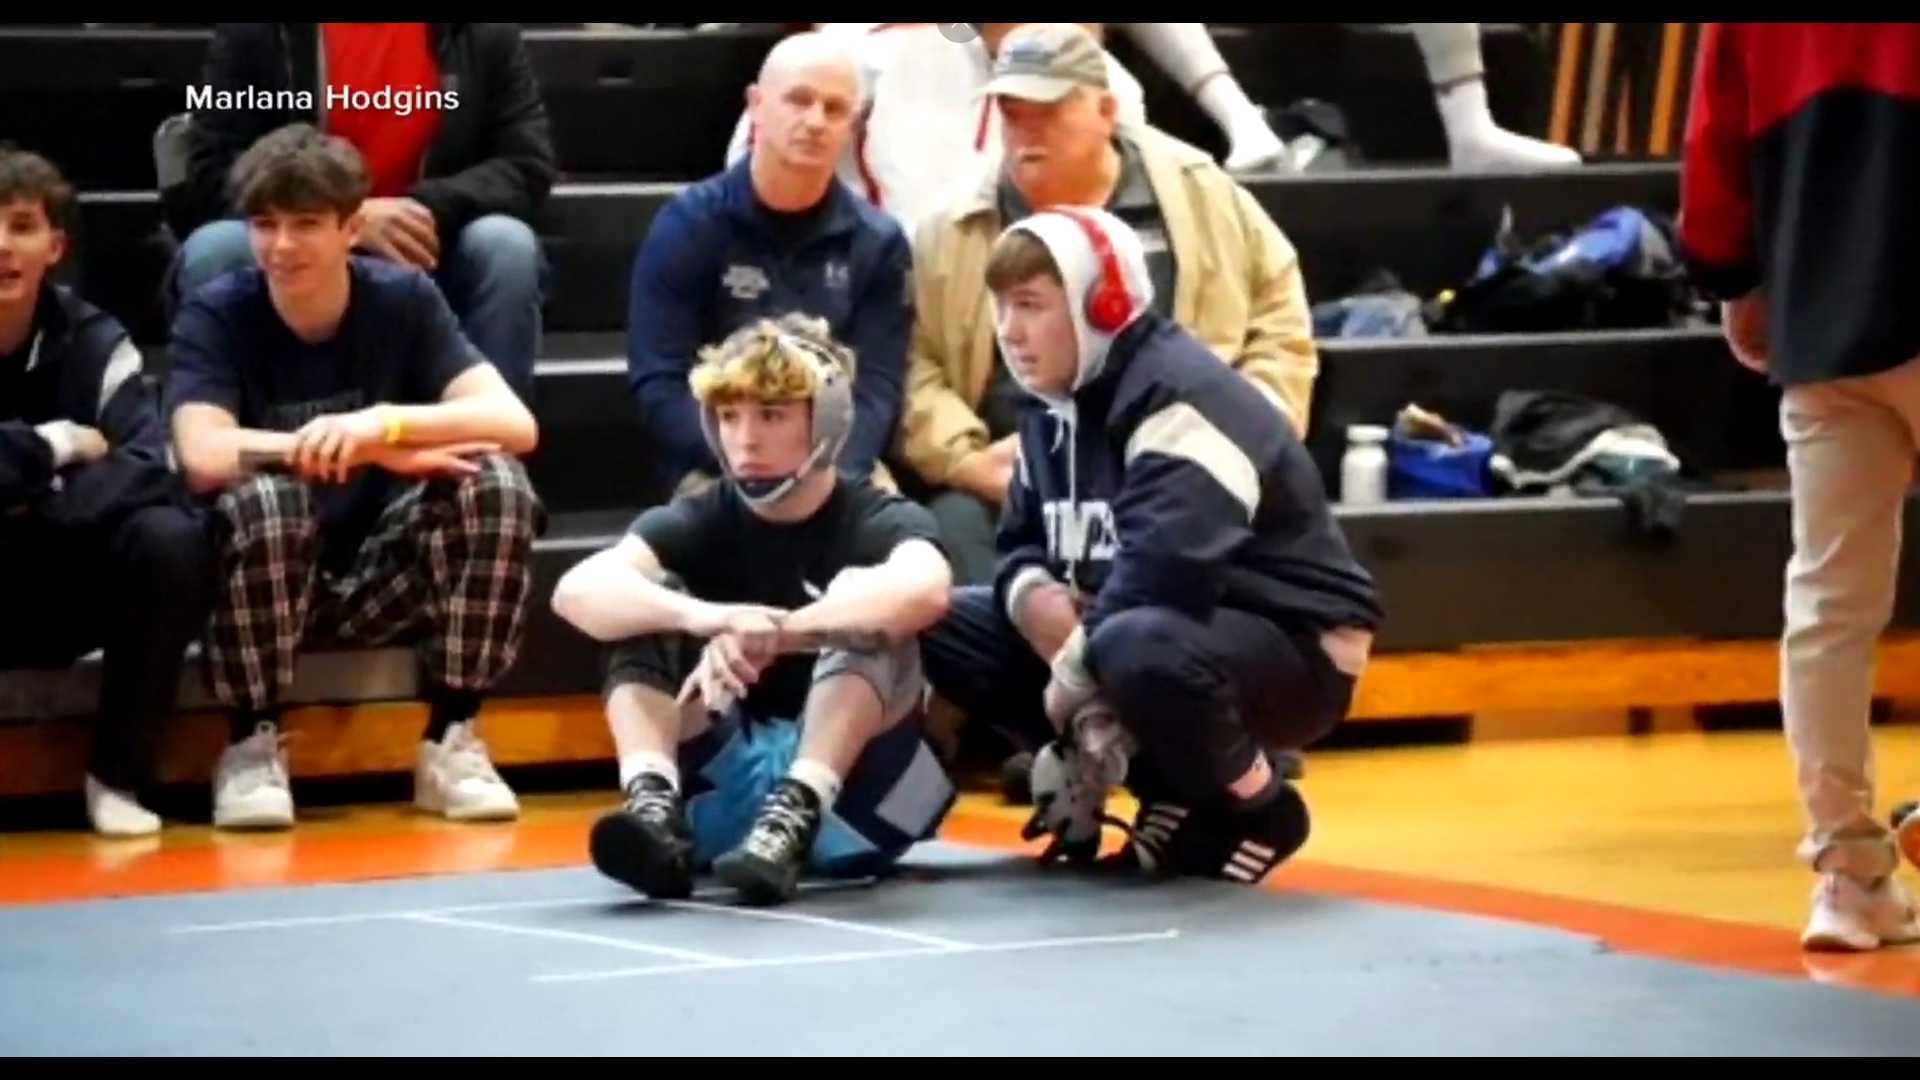 The high school wrestlers jumped into action to save their teammate with a heart condition.